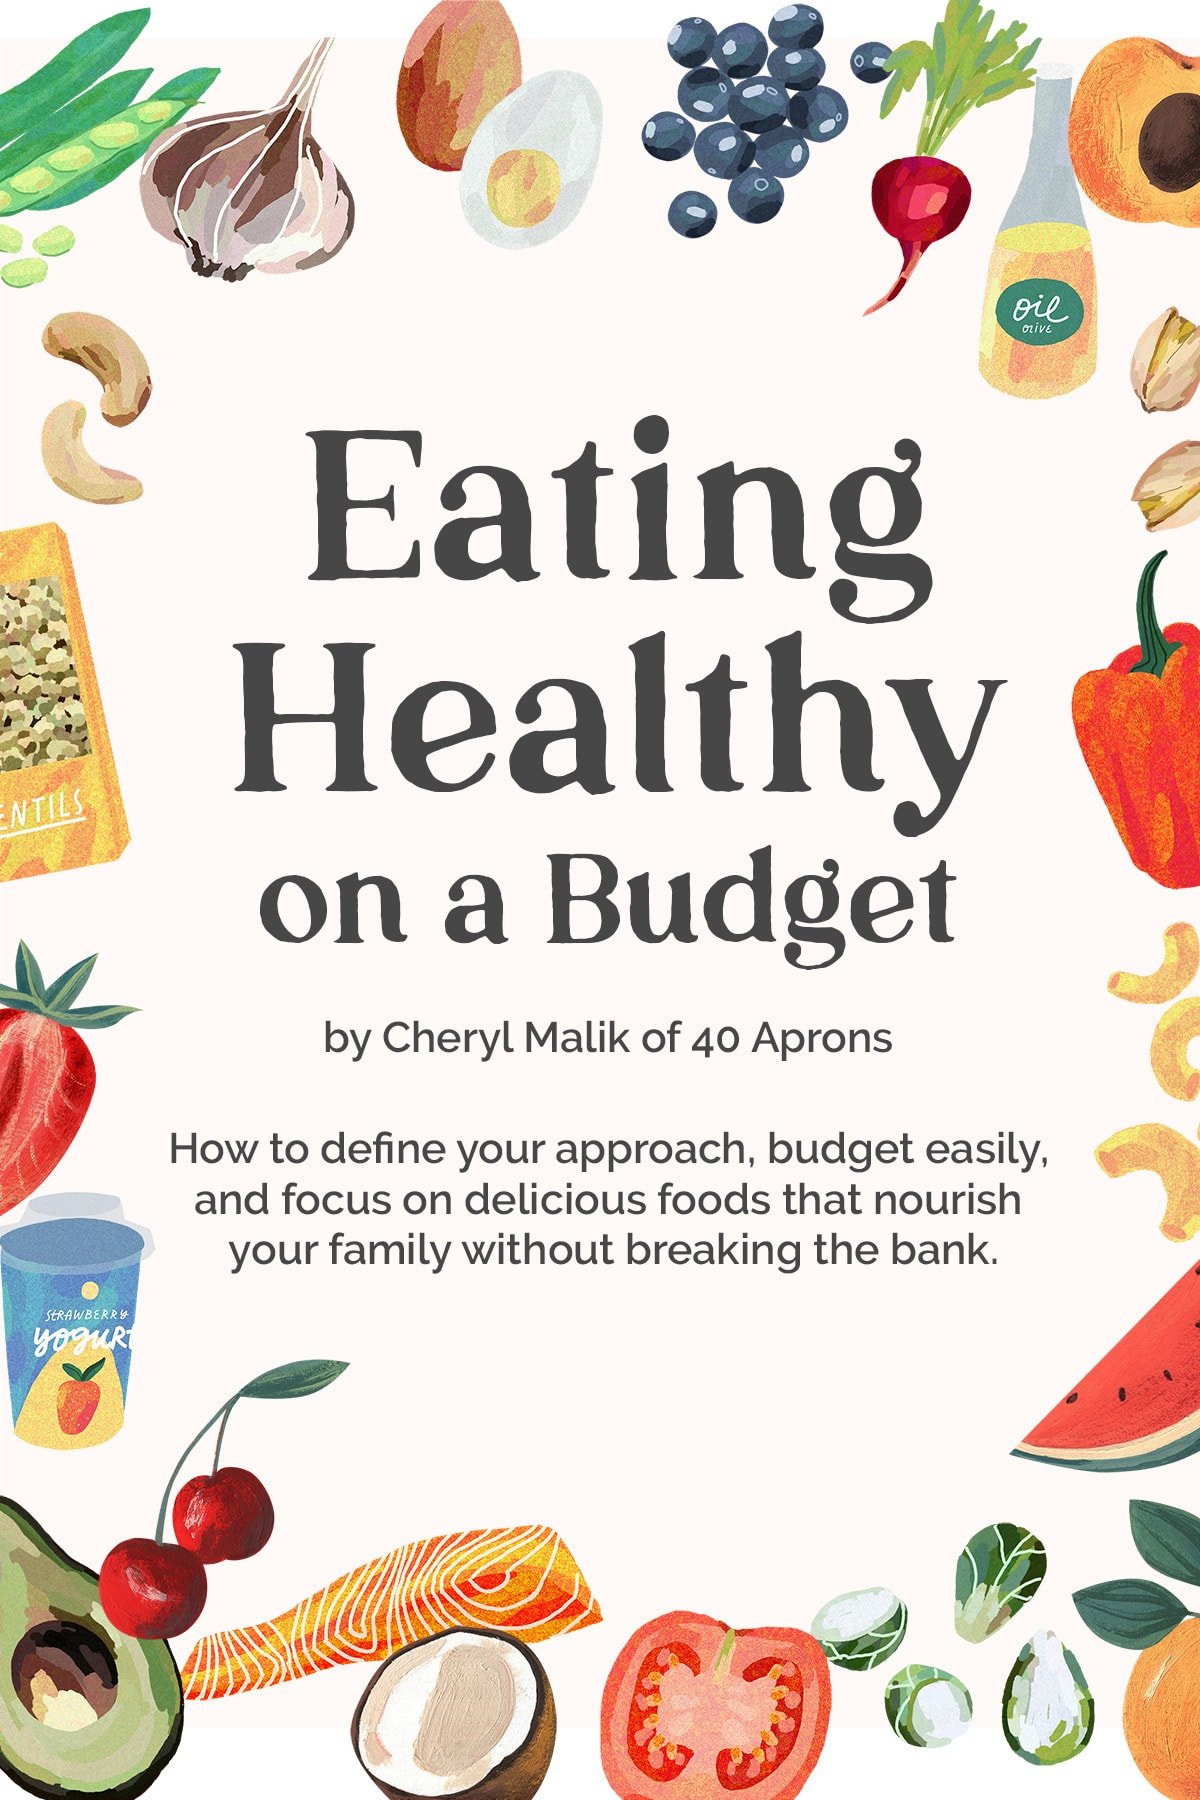 Eating Healthy on a Budget eBook cover.